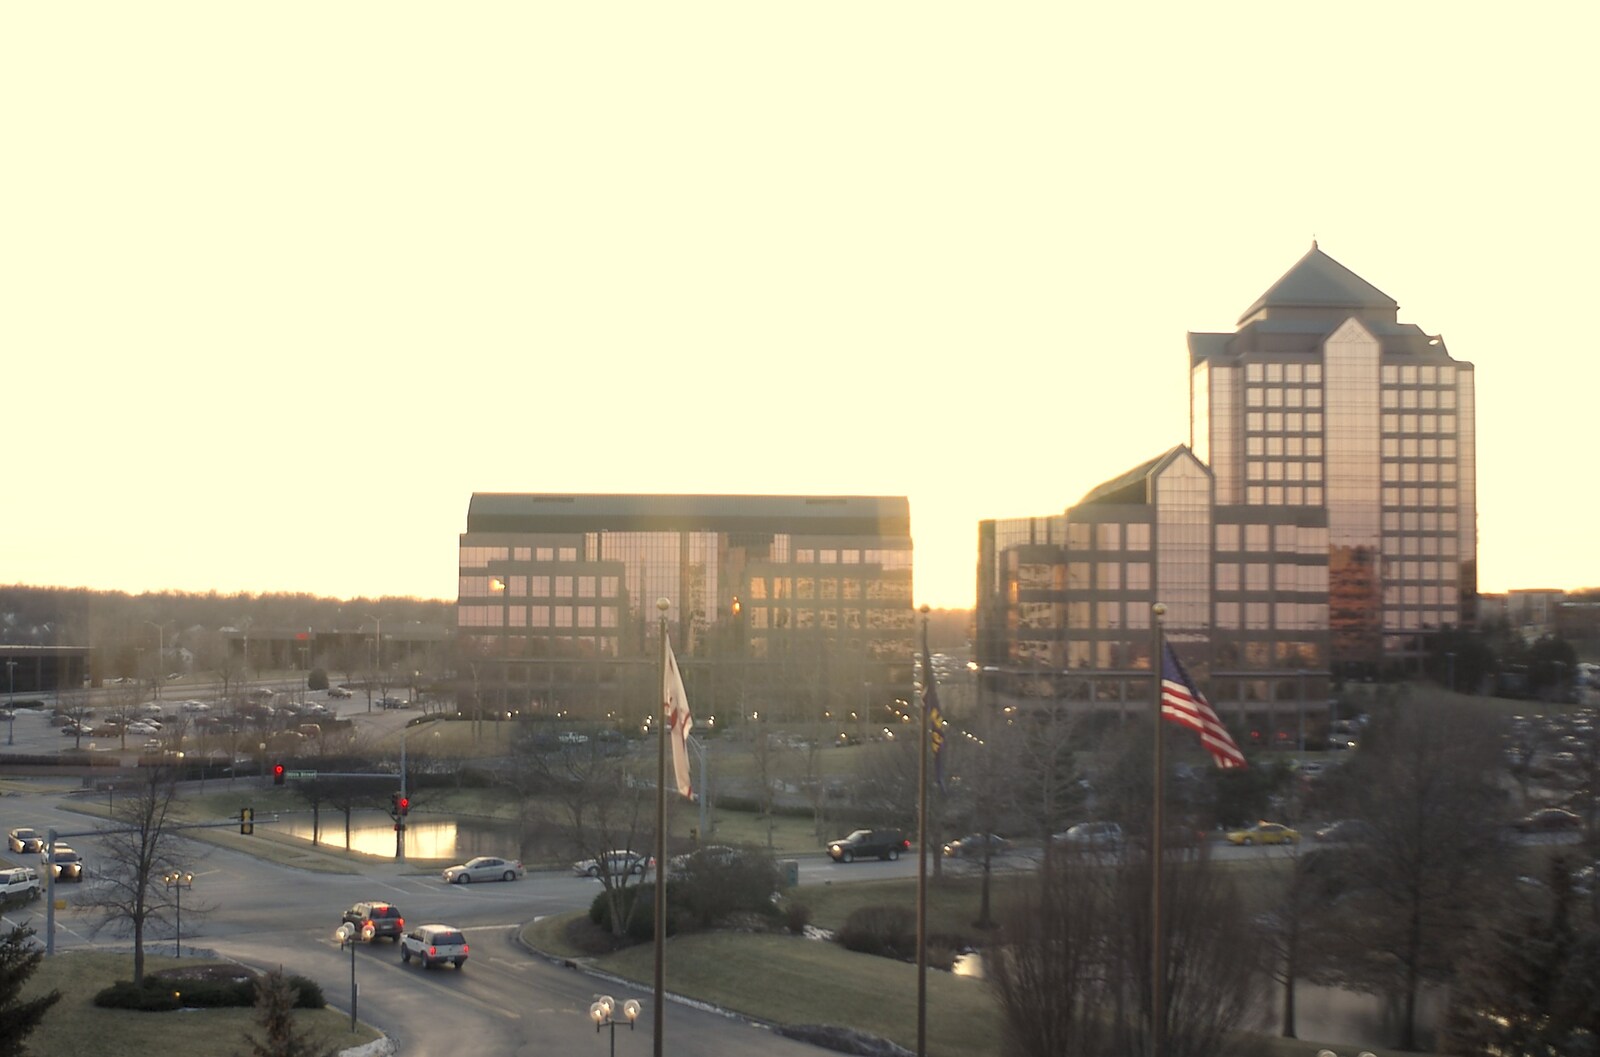 A Visit to Sprint, Overland Park, Kansas City, Missouri, US - 16th January 2005: The view from the hotel